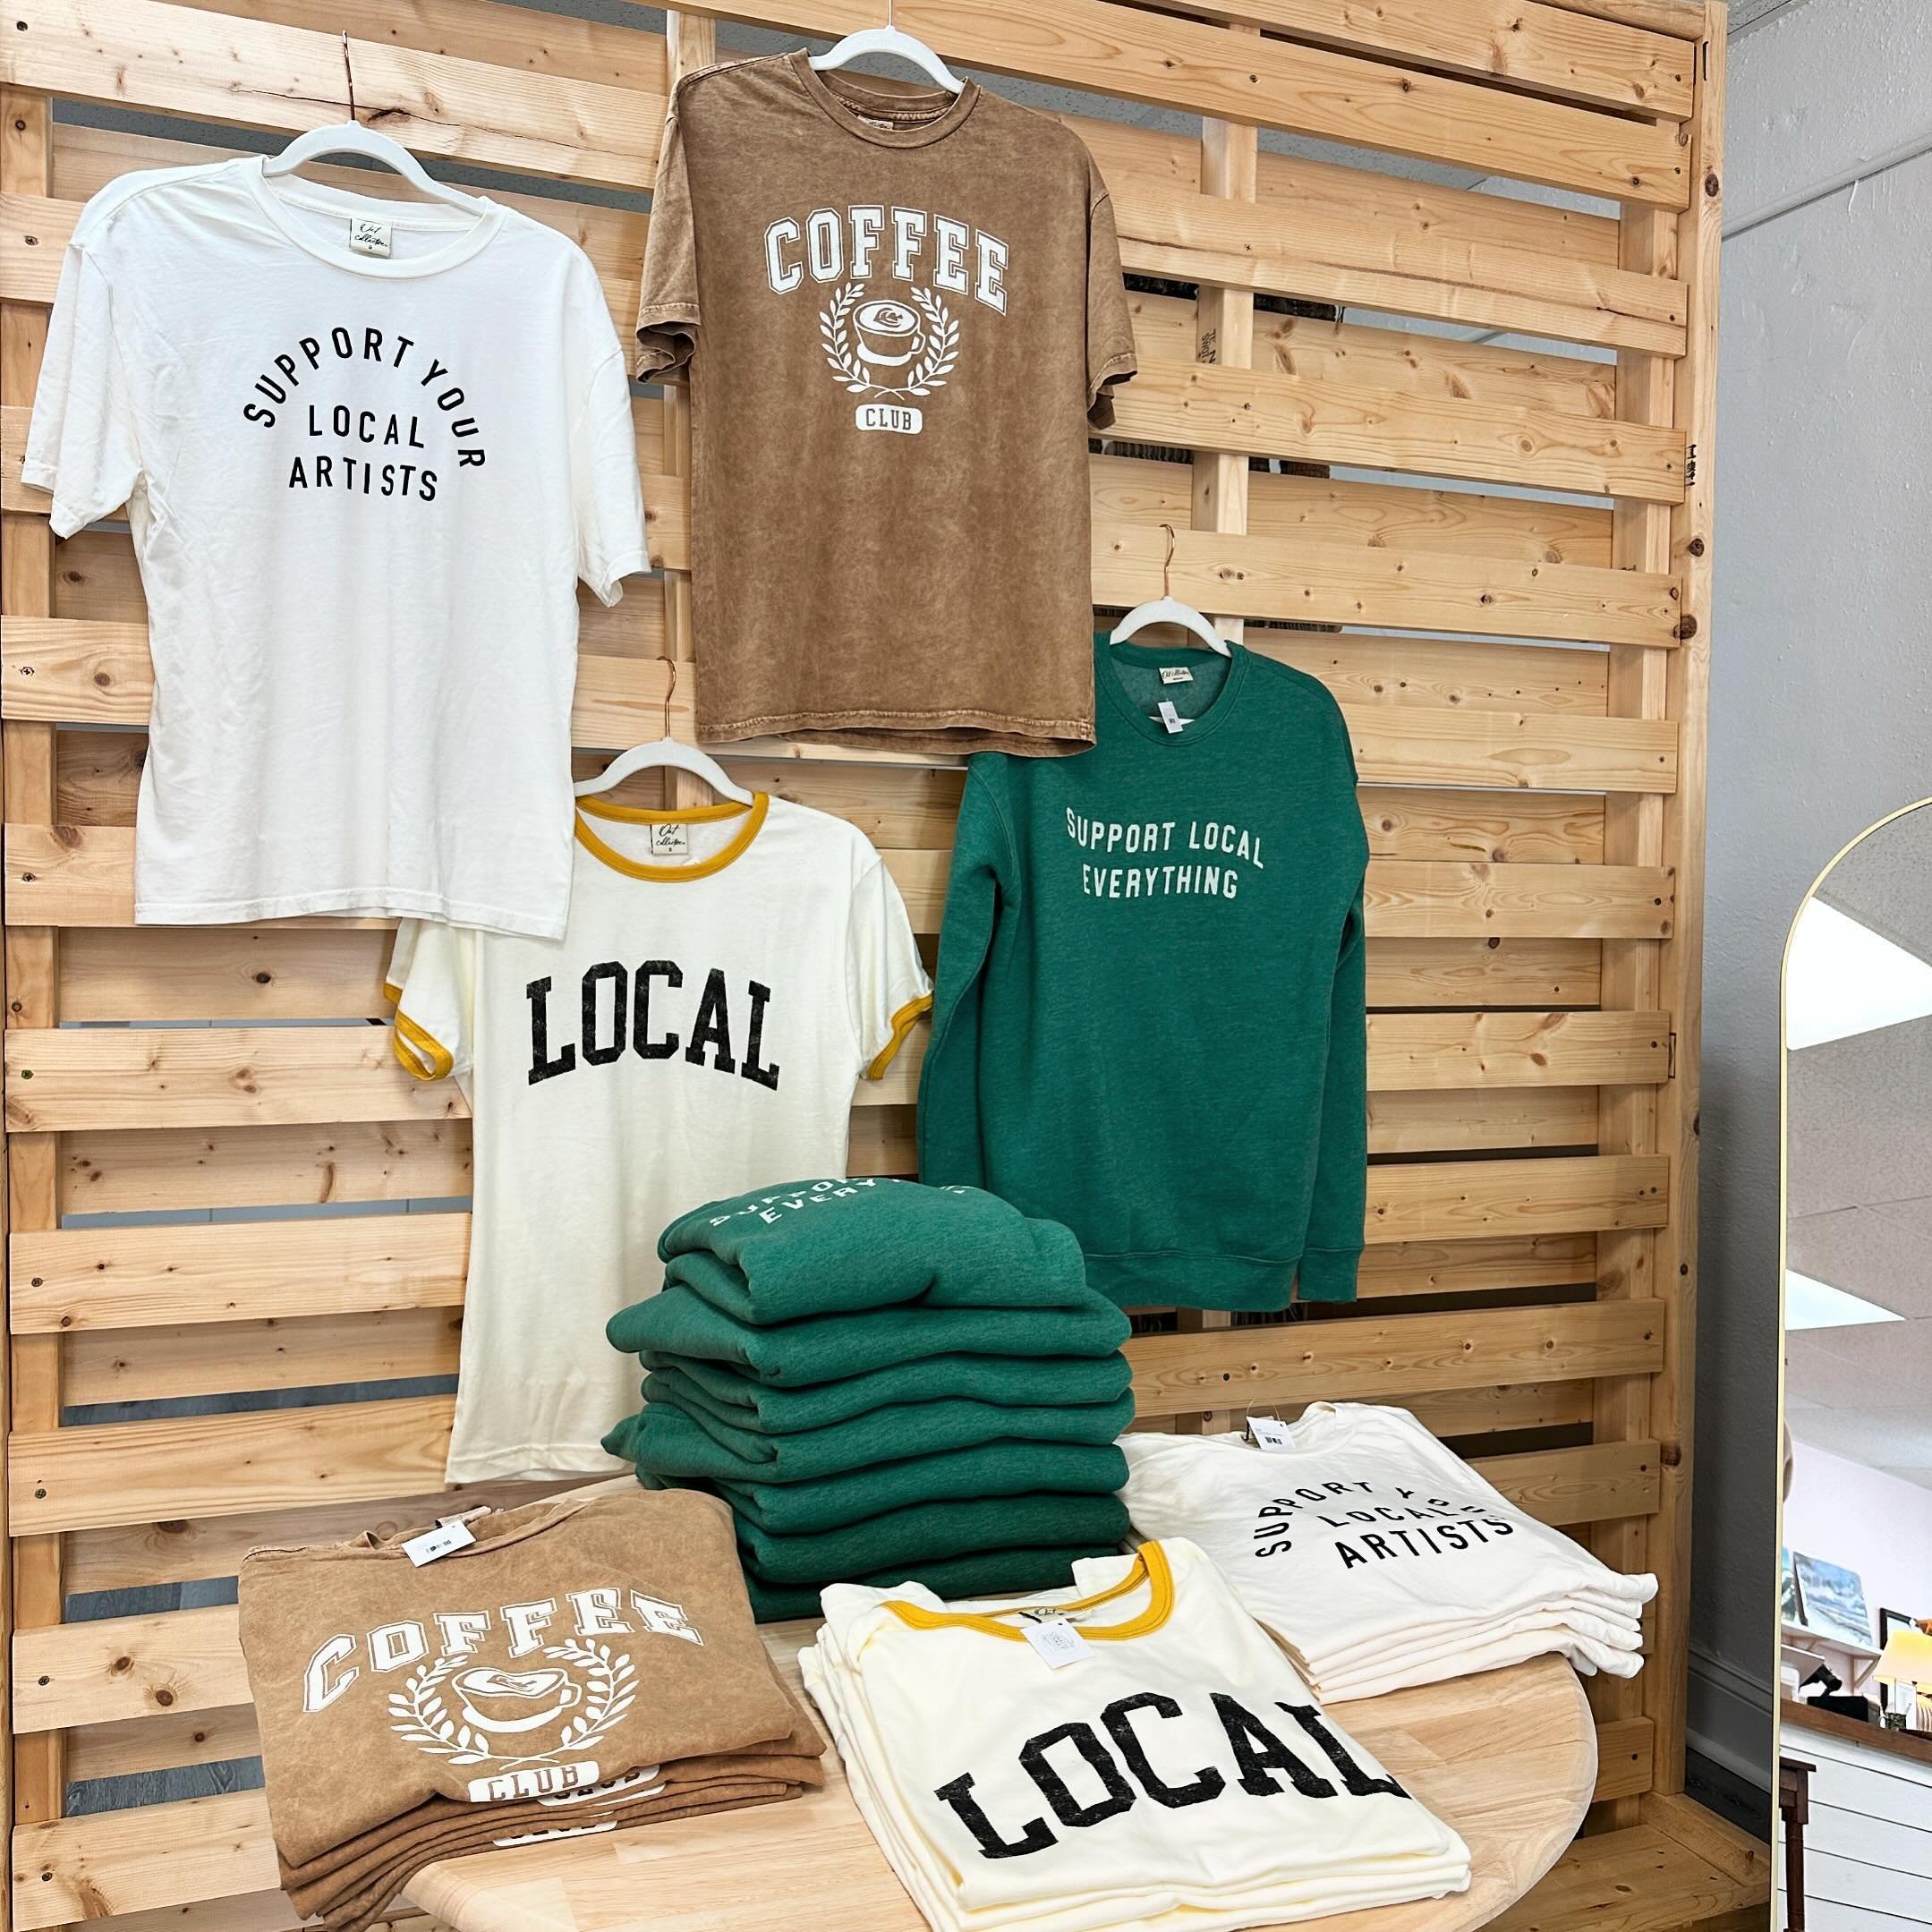 Tell the world how much you love local with our new collection of tshirts and hoodies! 🥰 Lightweight and super soft, we have each design available in sizes S-XL. Which one is your favorite? 💛